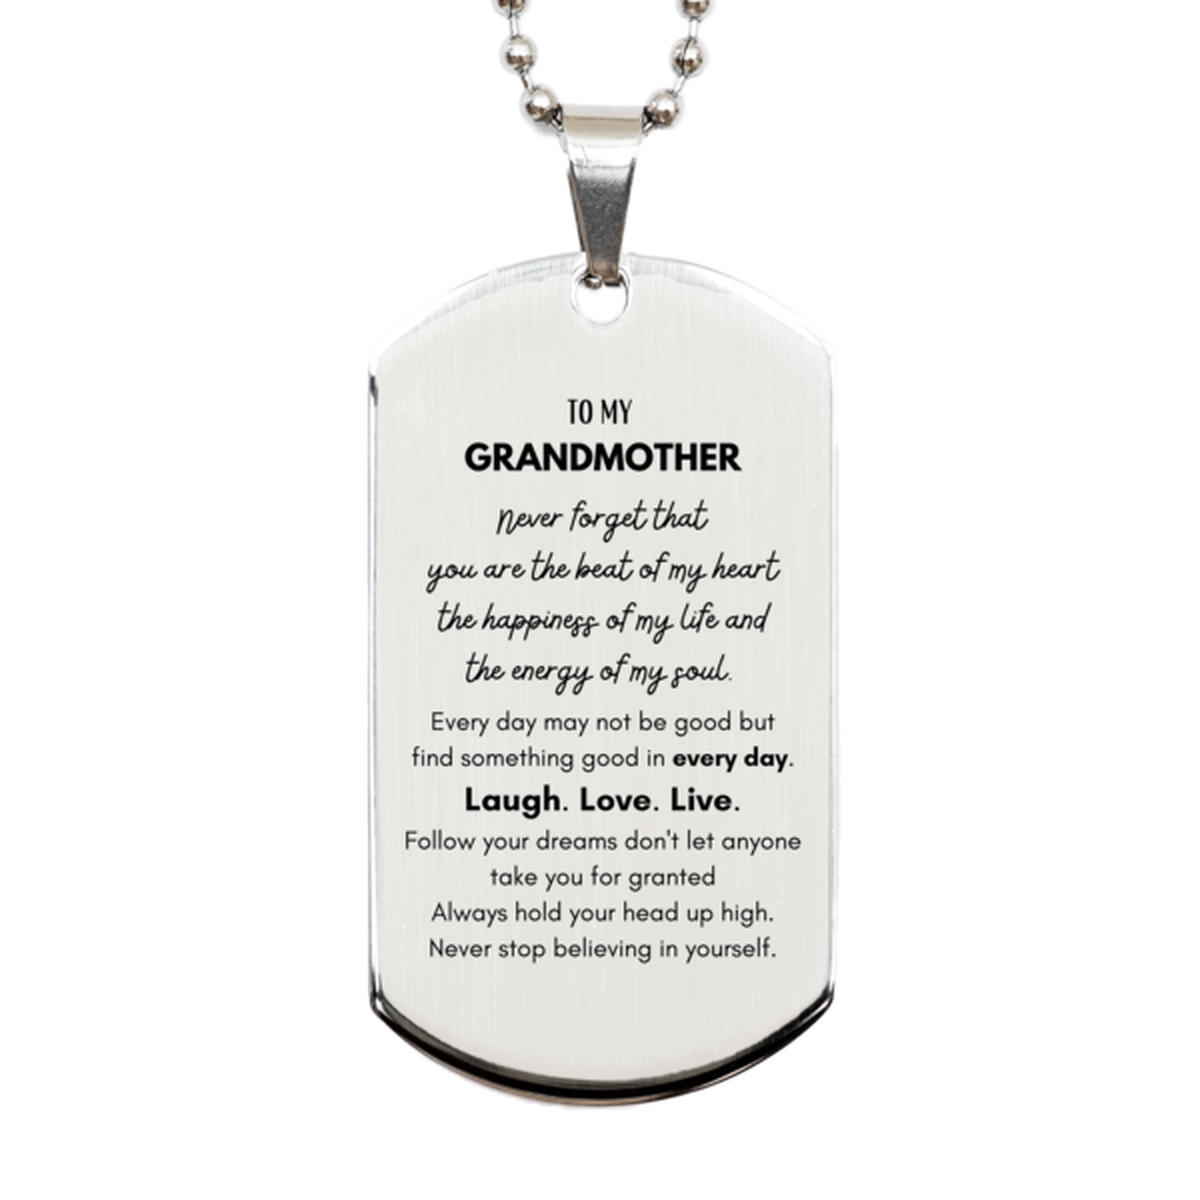 To My Grandmother Dogtag Gifts, Christmas Grandmother Silver Dog Tag Present, Birthday Unique Motivational For Grandmother, To My Grandmother Never forget that you are the beat of my heart the happiness of my life and the energy of my soul